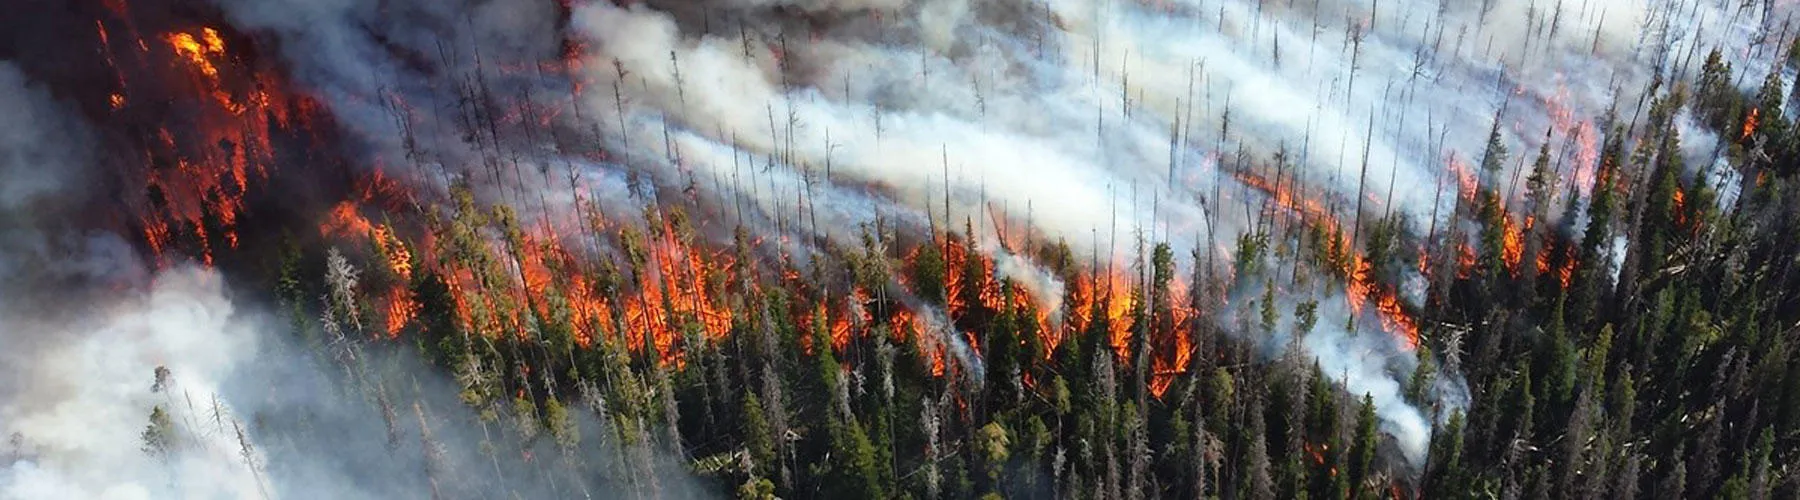 Fire burns through green trees, with white smoke trailing behind the fireline